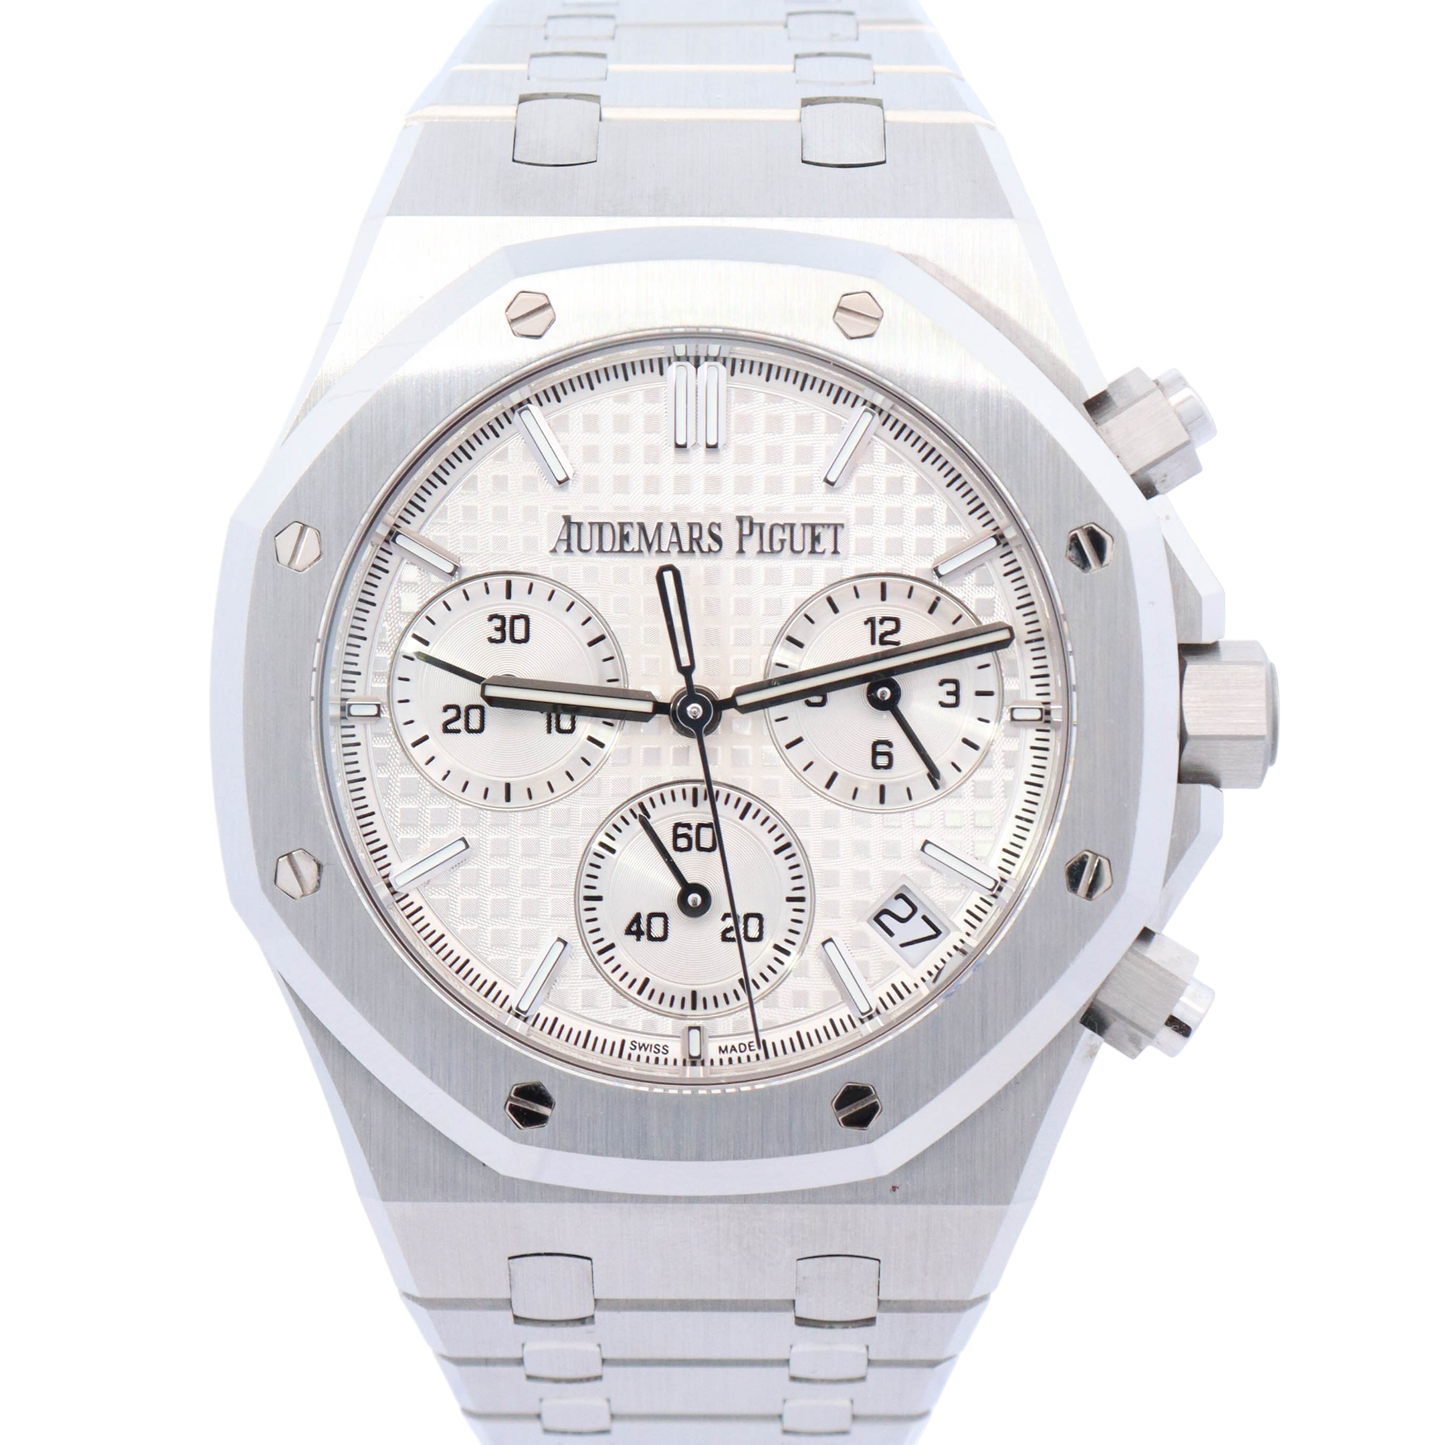 Audemars Piguet Royal Oak "50th Anniversary" 41mm White Chronograph Dial Watch Reference# 26240ST.OO.1320ST.03 - Happy Jewelers Fine Jewelry Lifetime Warranty